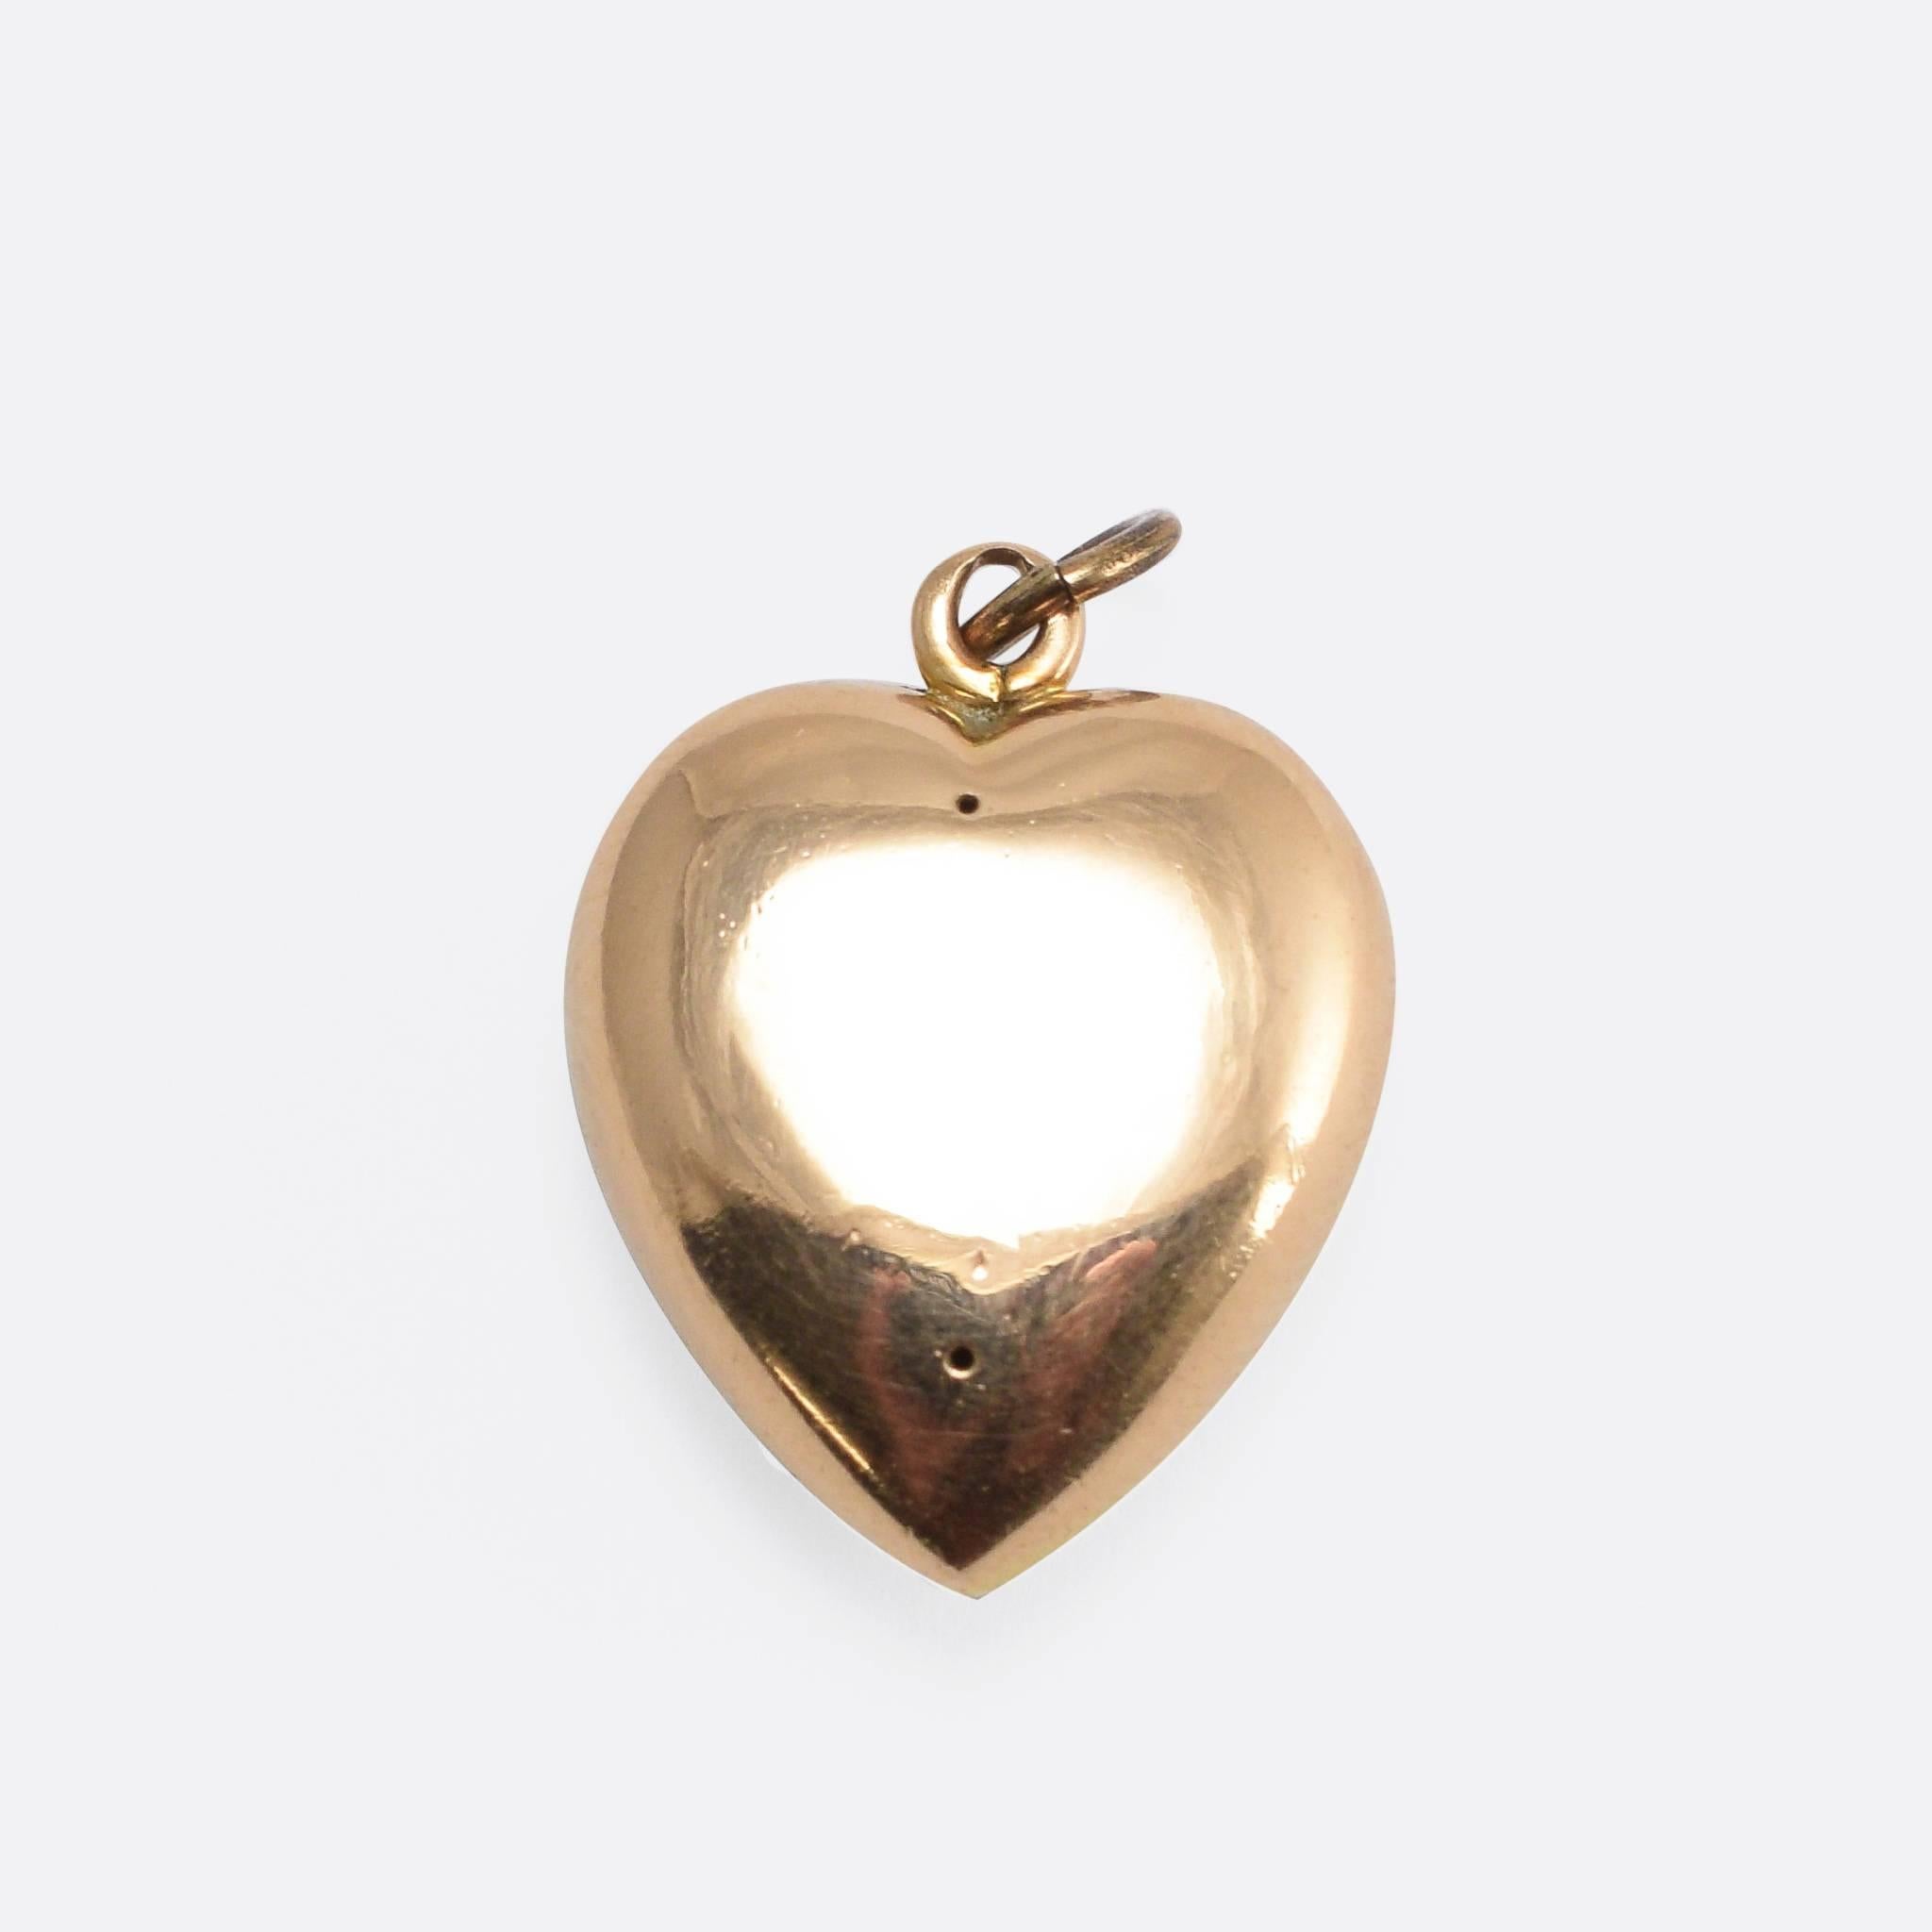 This pretty antique heart pendant is pavé set with seed pearls. It's modelled in 15k yellow gold, and dates to the late 19th Century. The word pavé is French, and literally translates to English as 